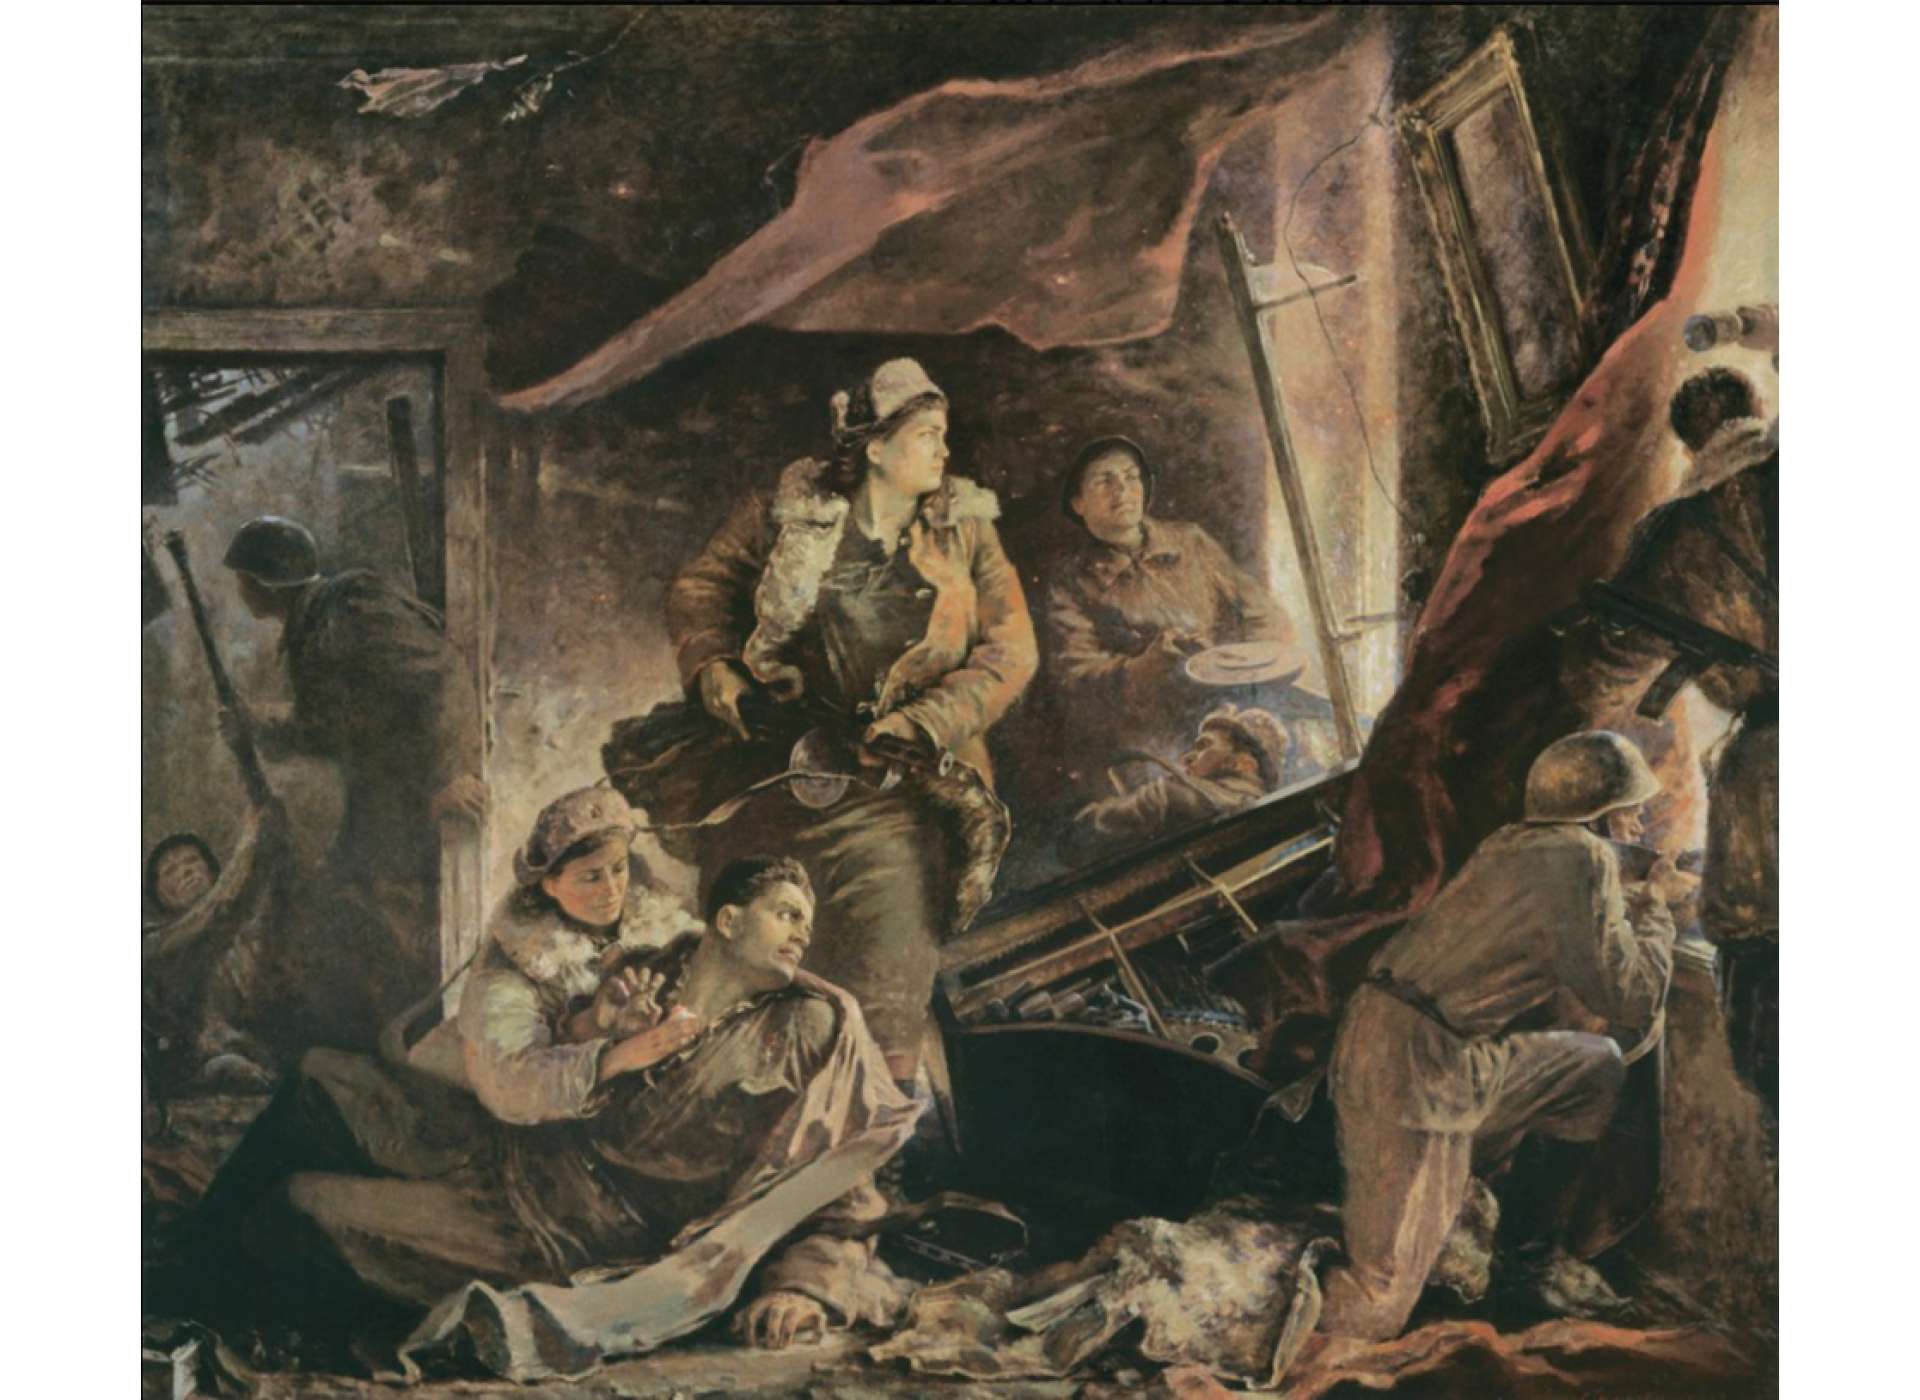 Memorialisation of the battle: A.N.Samokhvalov, Stalingraders (1947), Russian State Museum (https://rusmuseumvrm.ru/data/collections/painting/19_20/zhb-966/index.php)